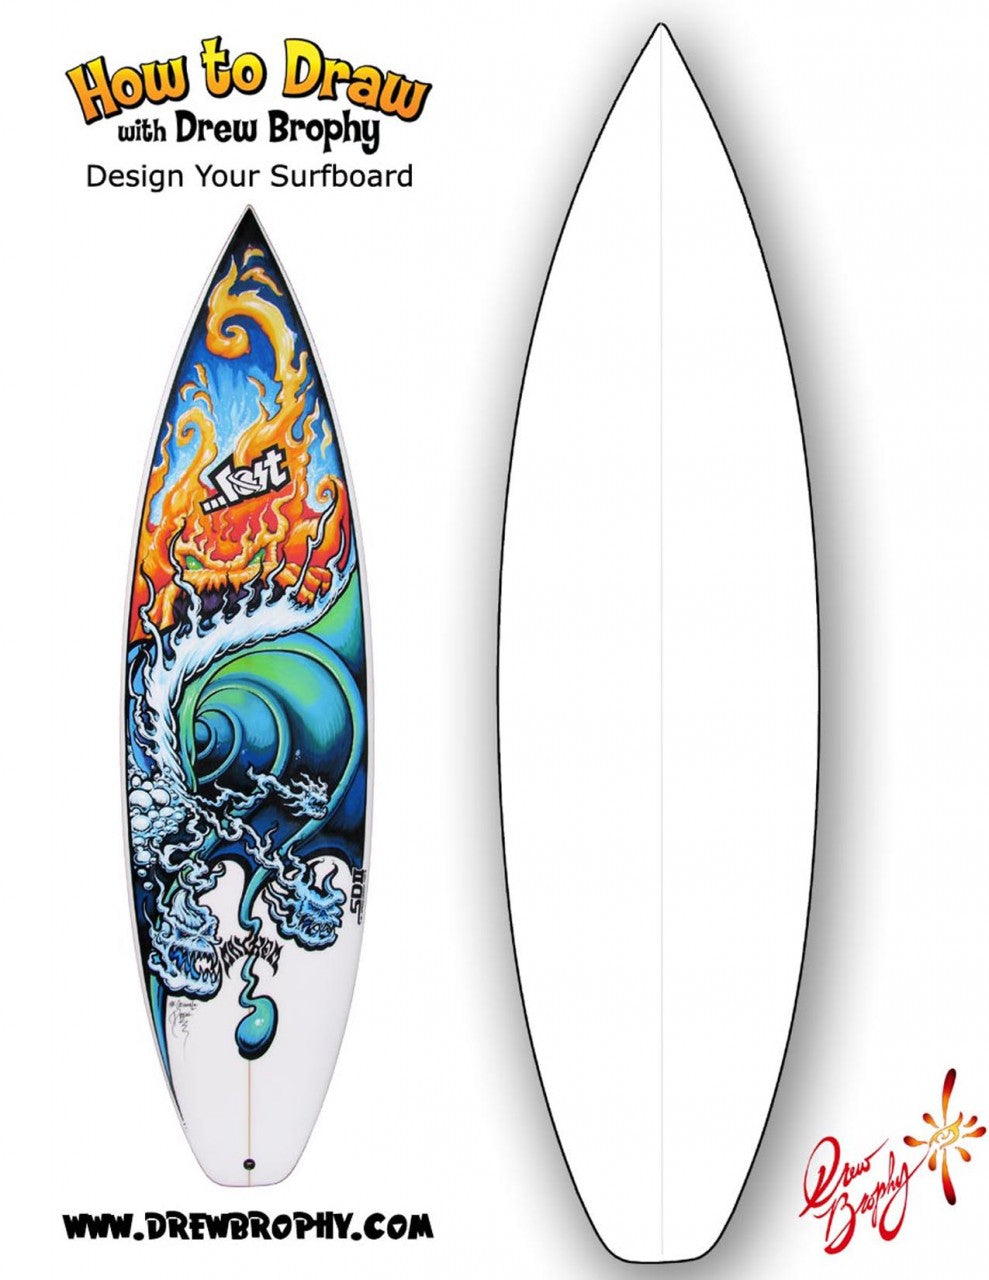 DESIGN YOUR OWN SURFBOARD - Free Art Template for Kids